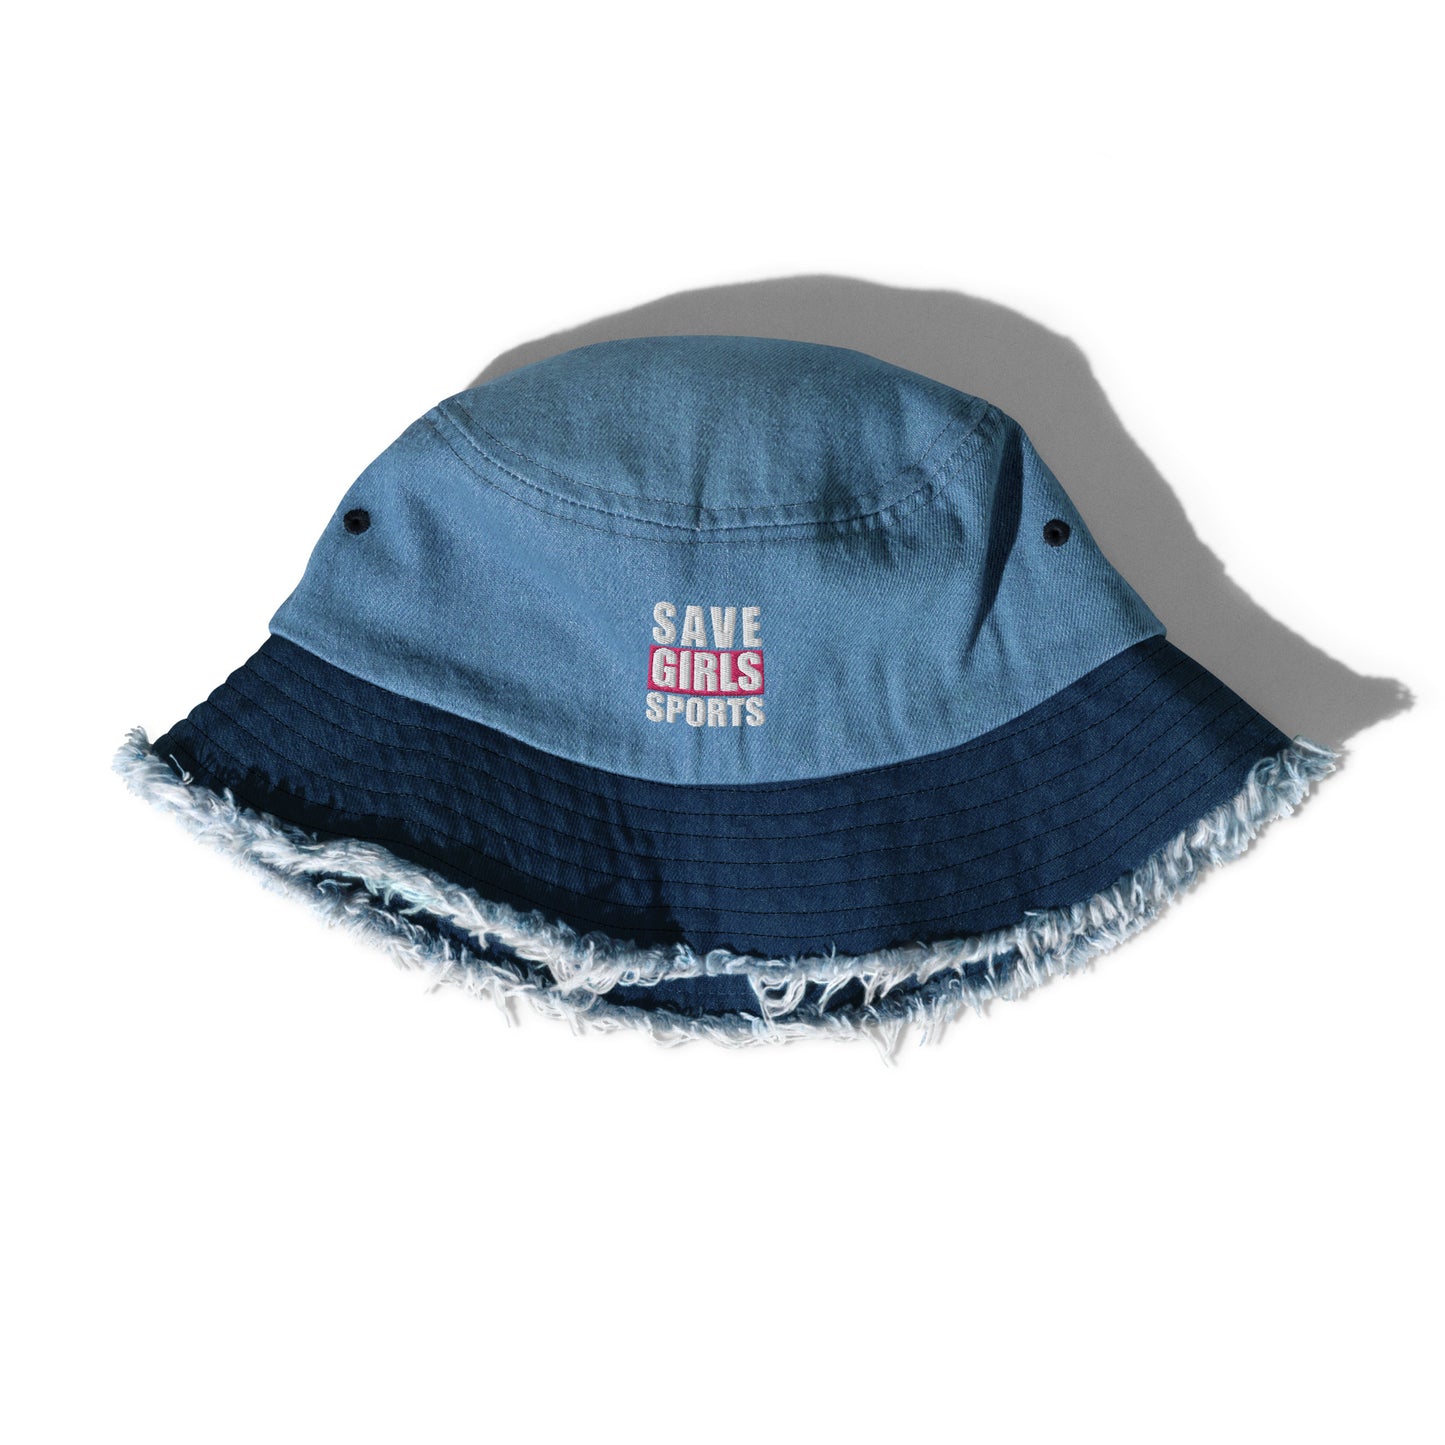 Save Girls Sports Embroidered Bucket Hat